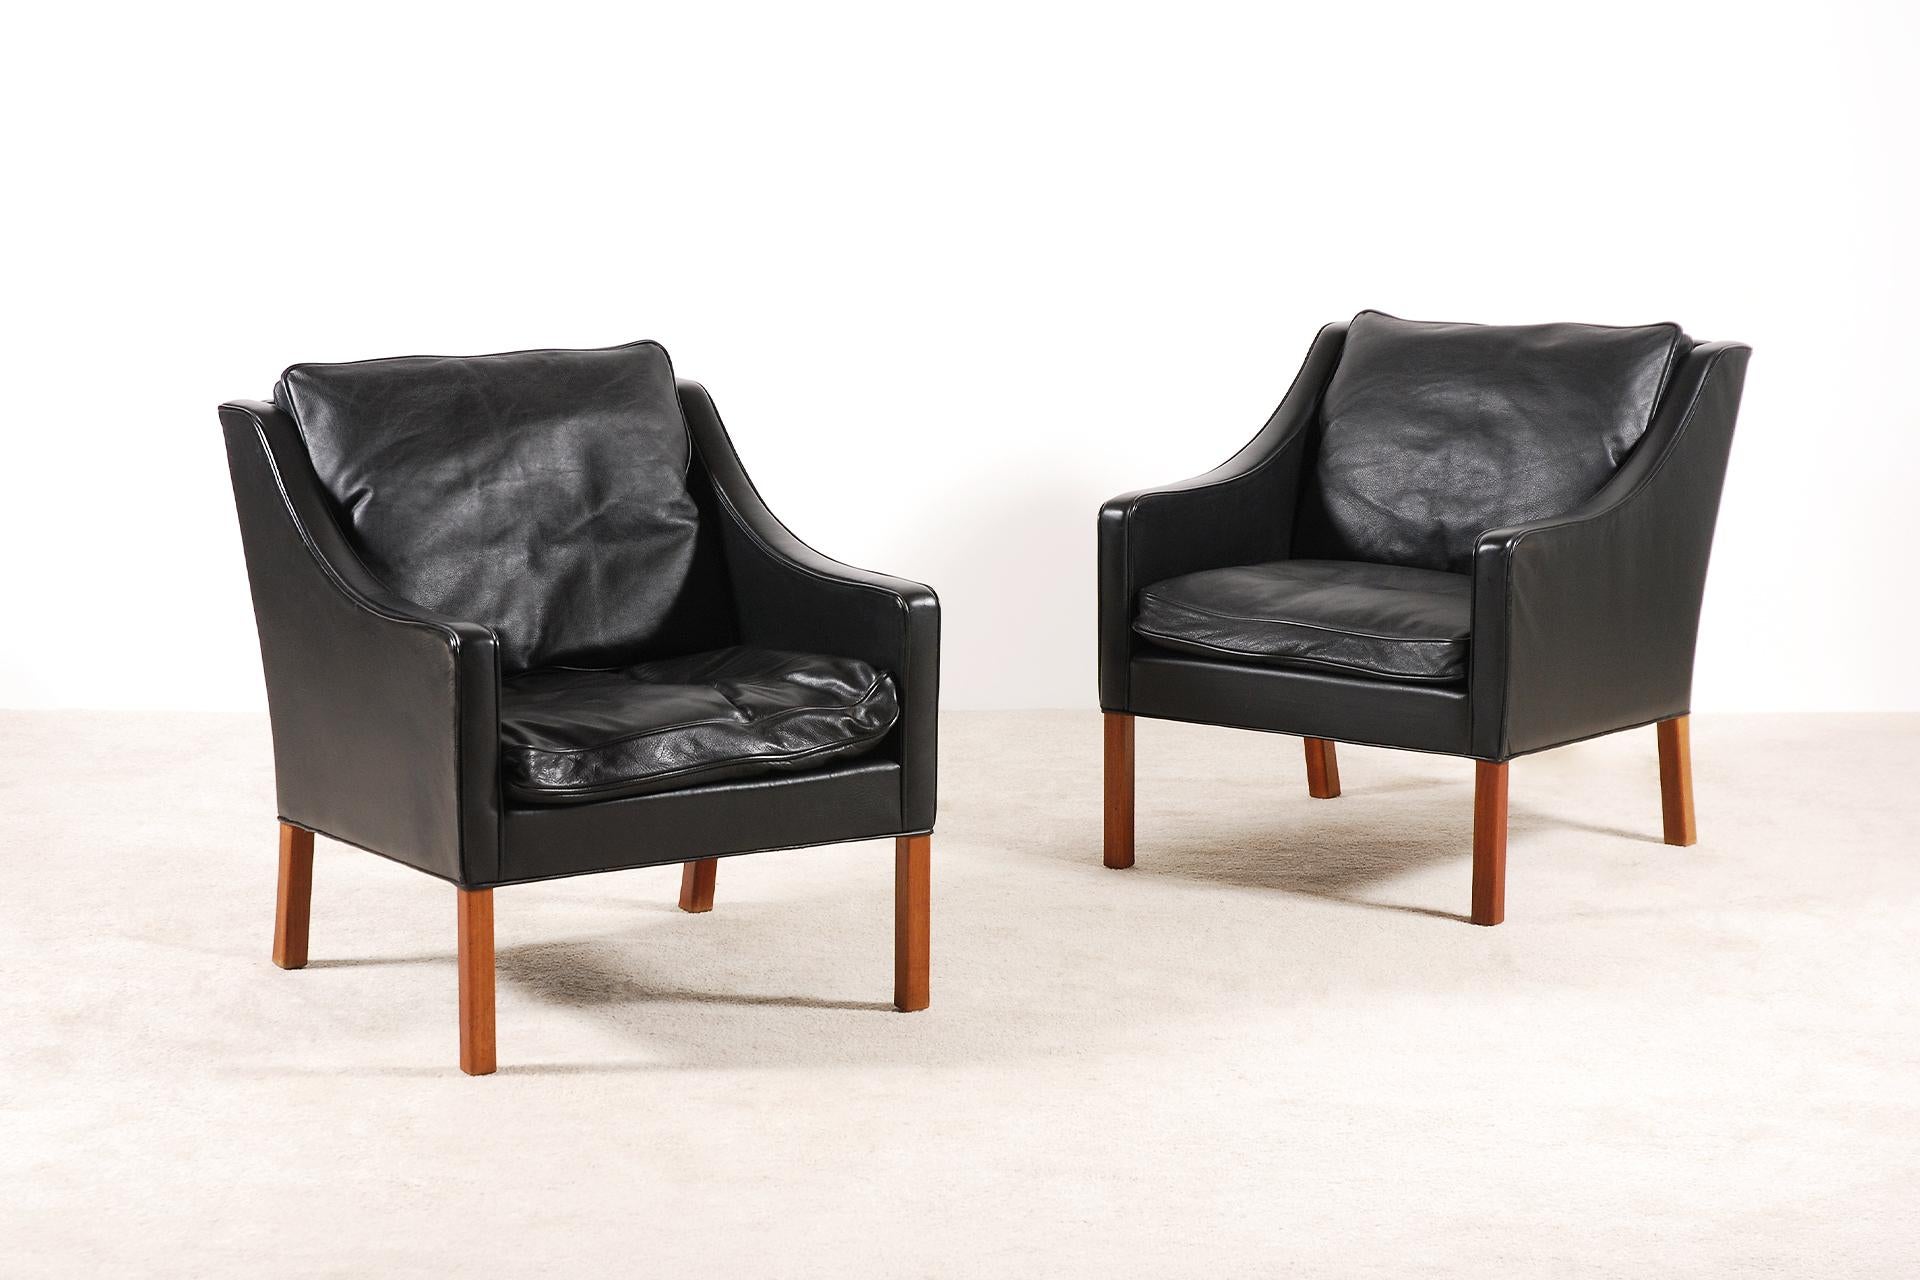 Pair of black leather armchairs designed by Børge Mogensen in 1963.
Model 2207 manufactured by Fredericia Furniture.
Teak feet and black leather.
Very good condition.